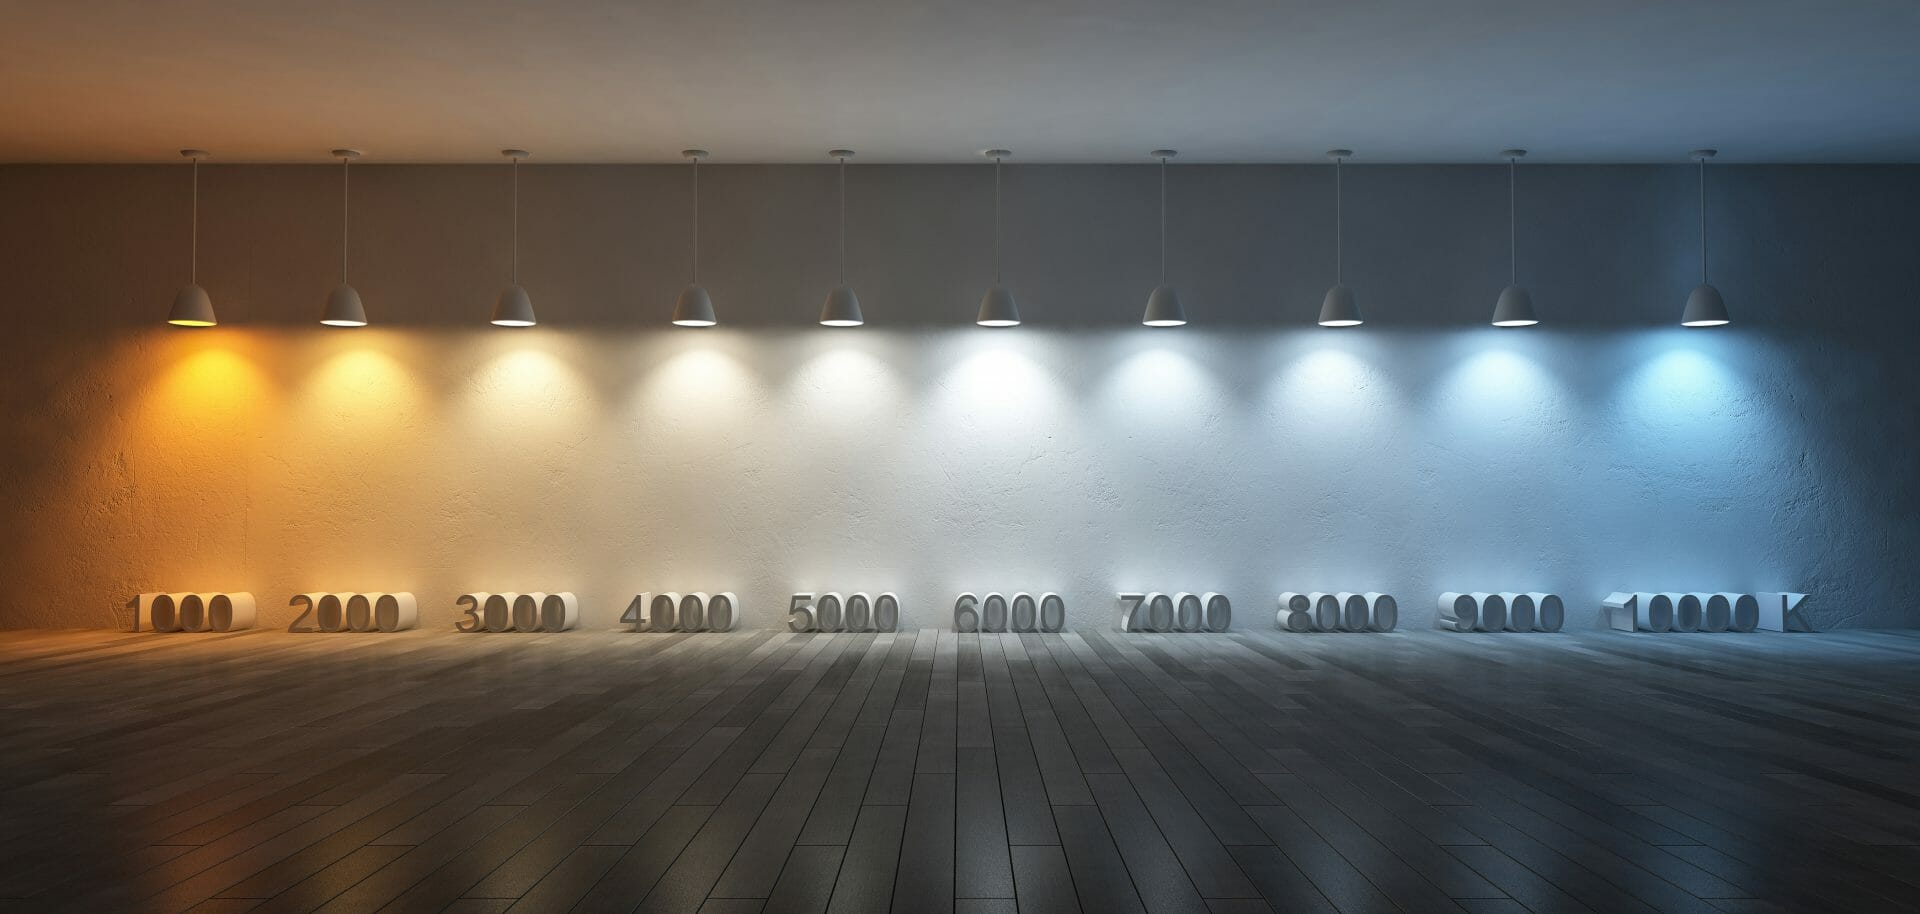 A row of ten pendant lamps each with a different colour temperature bulb shining on a number below of its colour temperature value in Kelvin